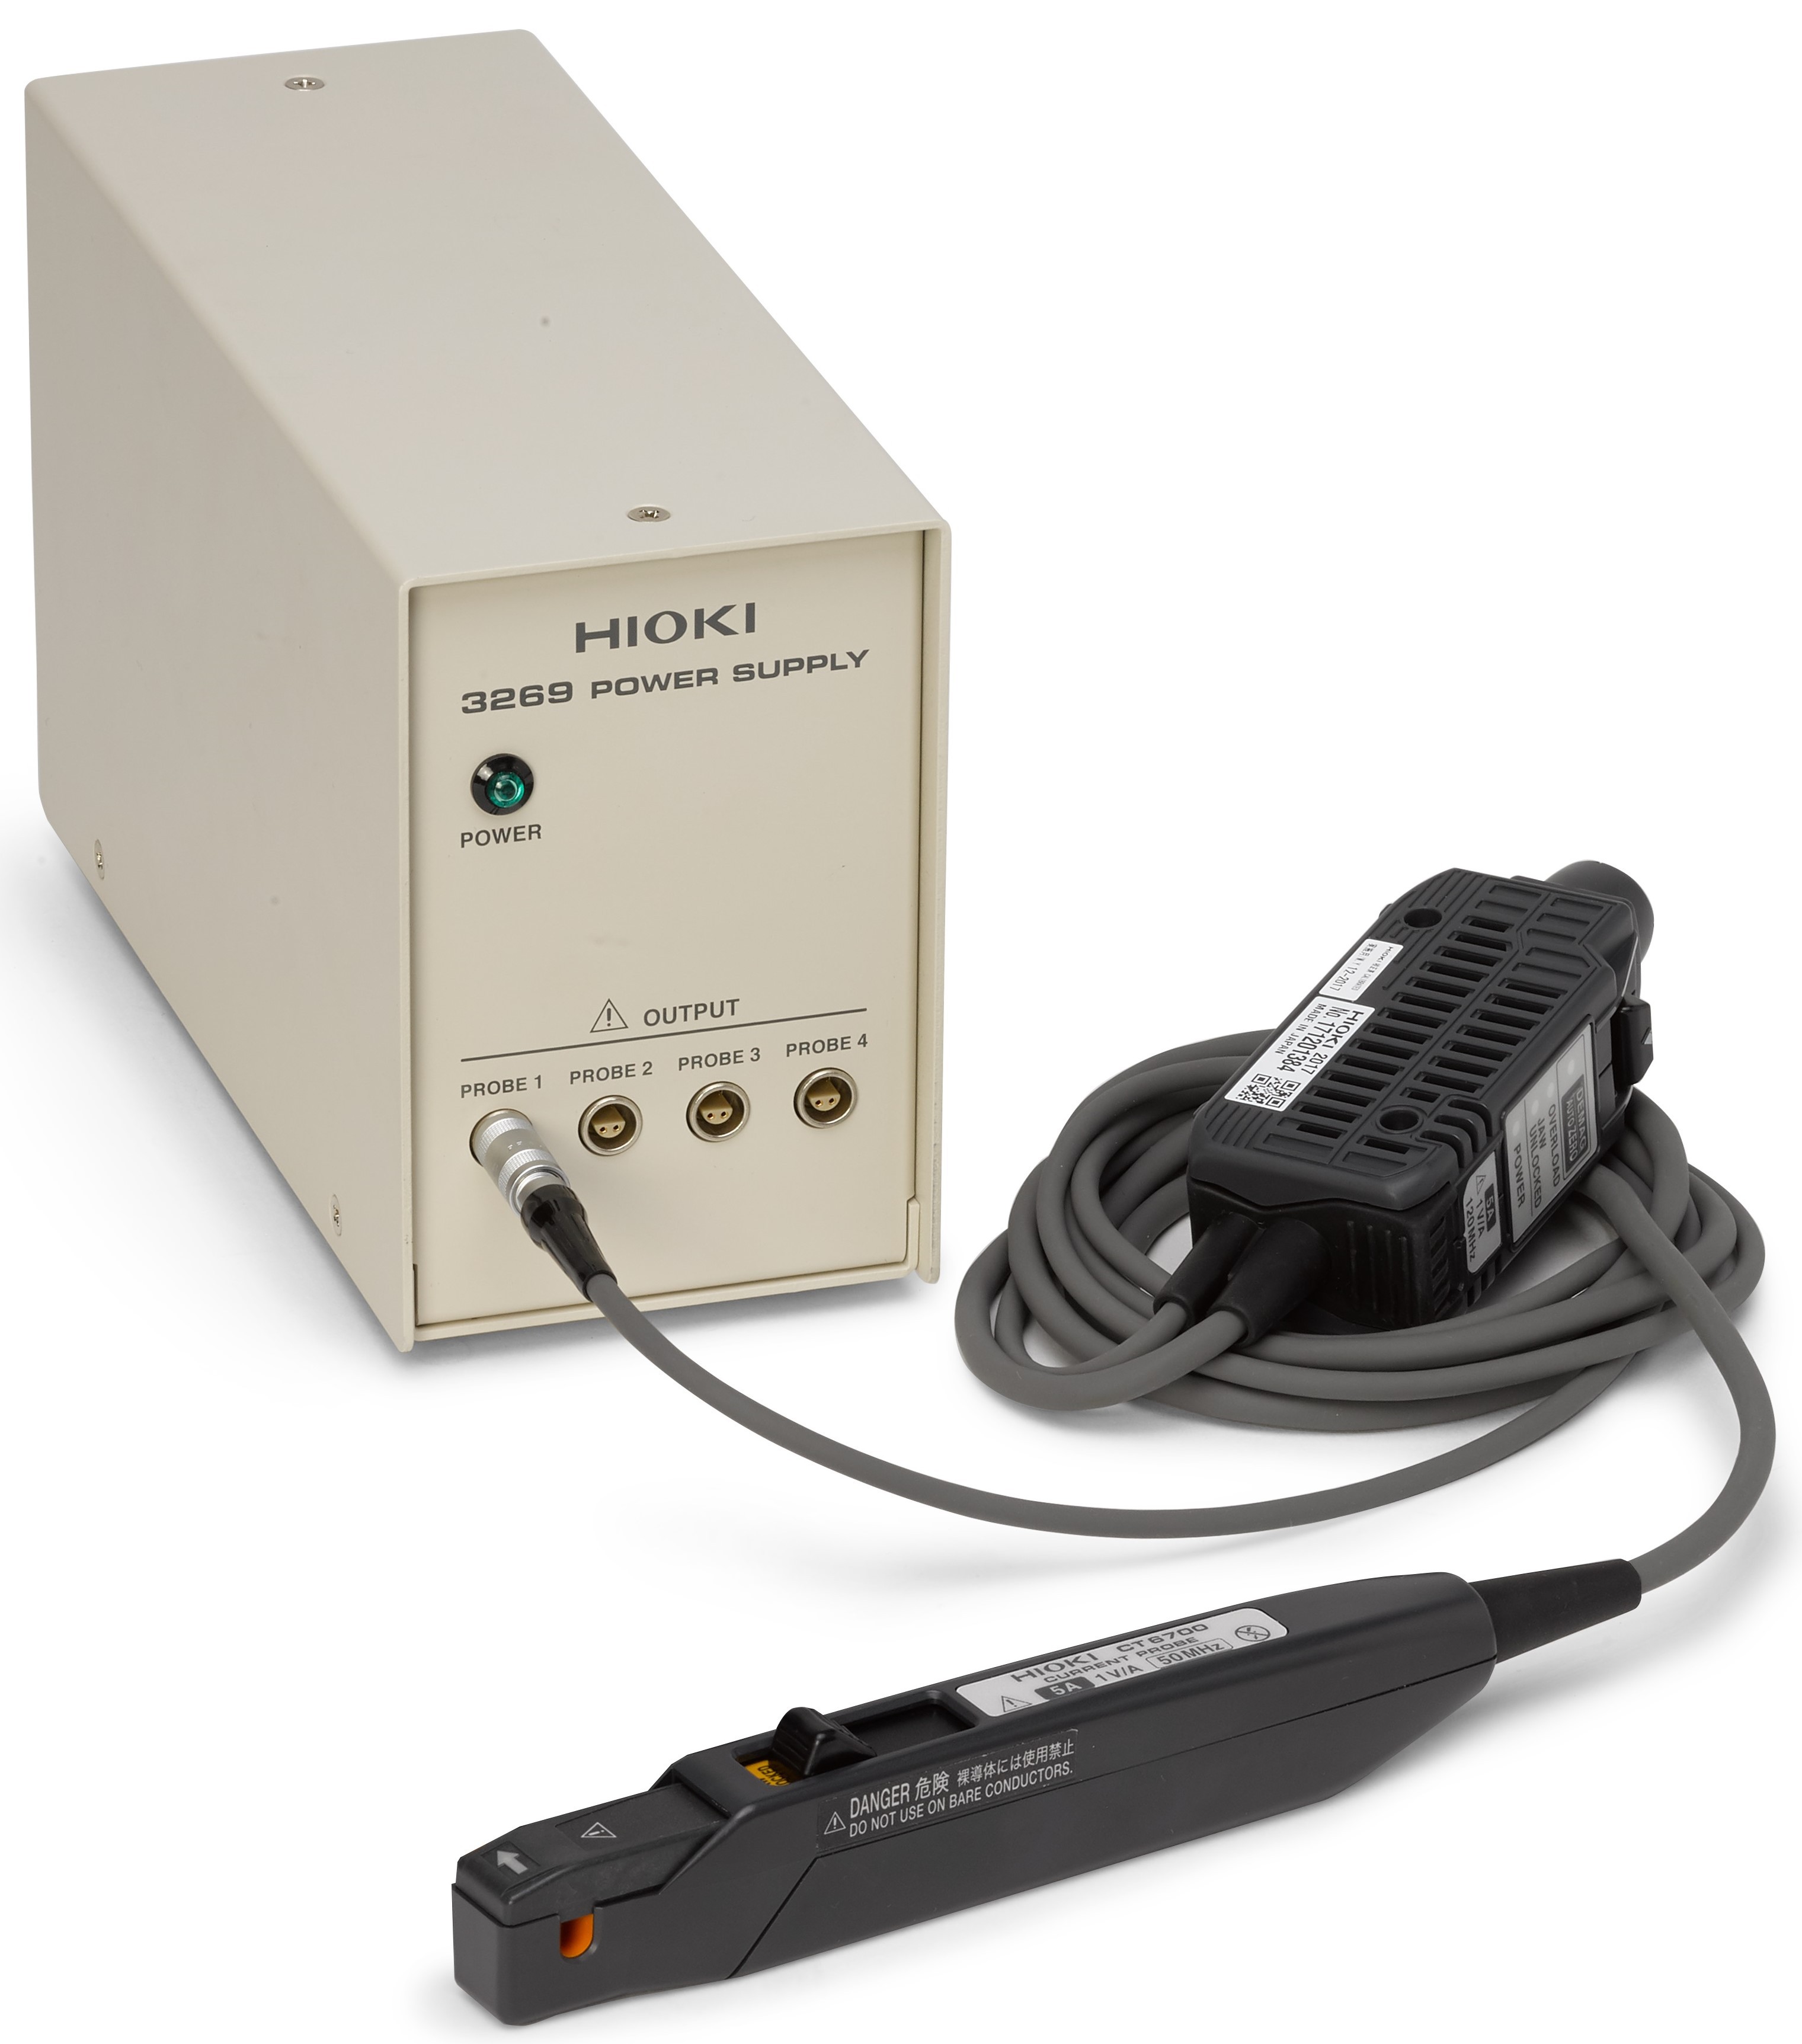  Hioki current probe connected to a four-channel power supply